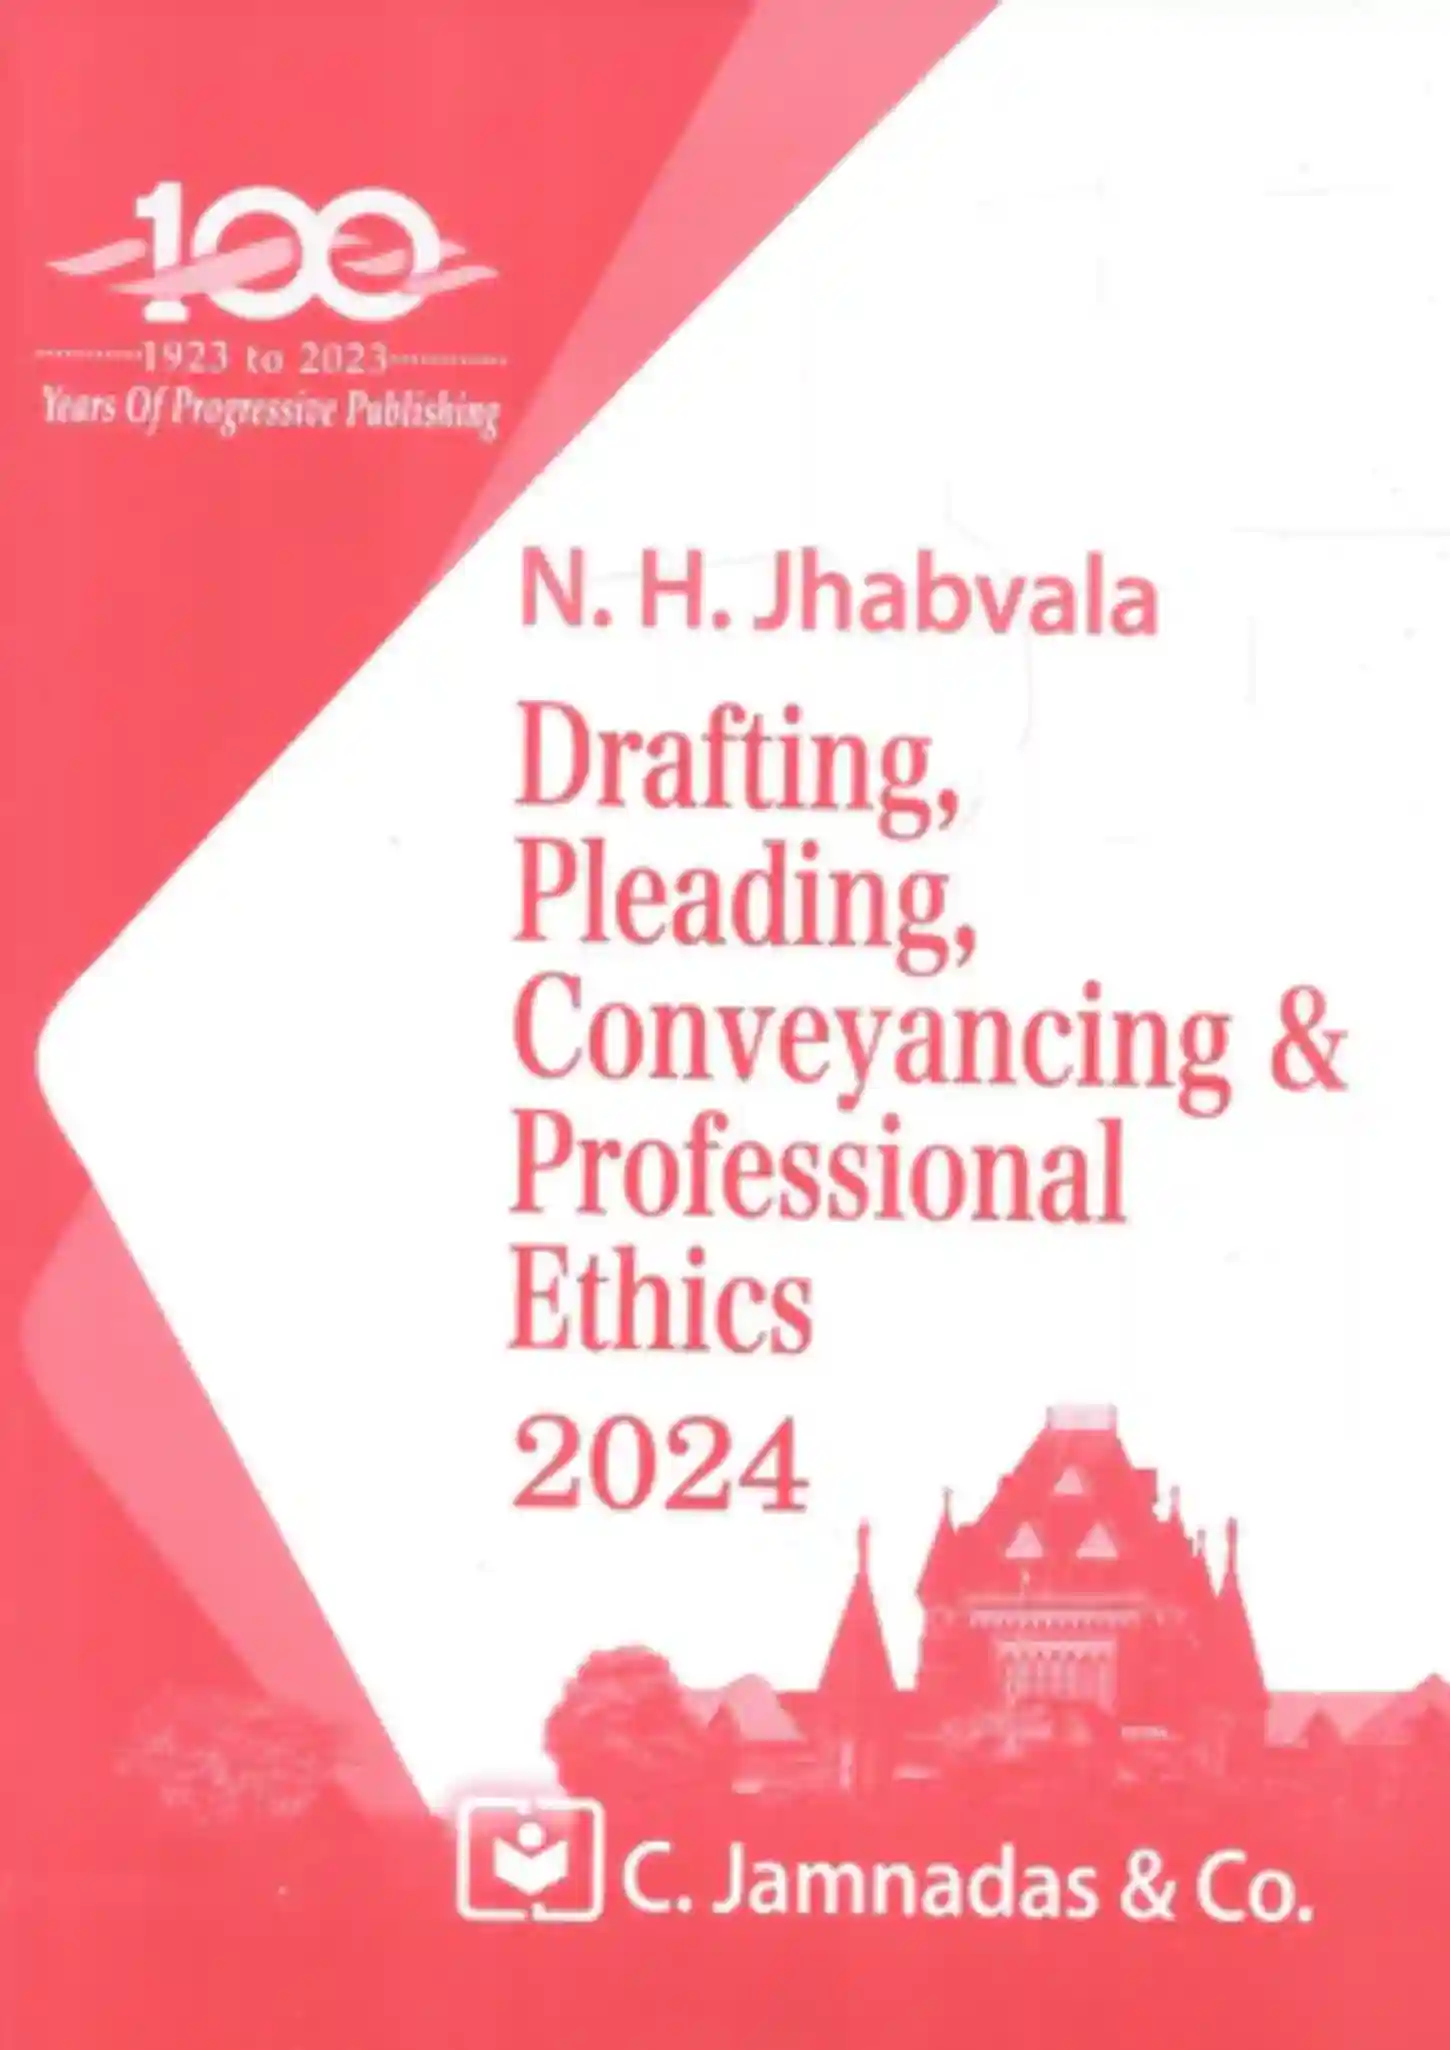 Drafting, Pleading, Conveyancing & Professional Ethics 2024